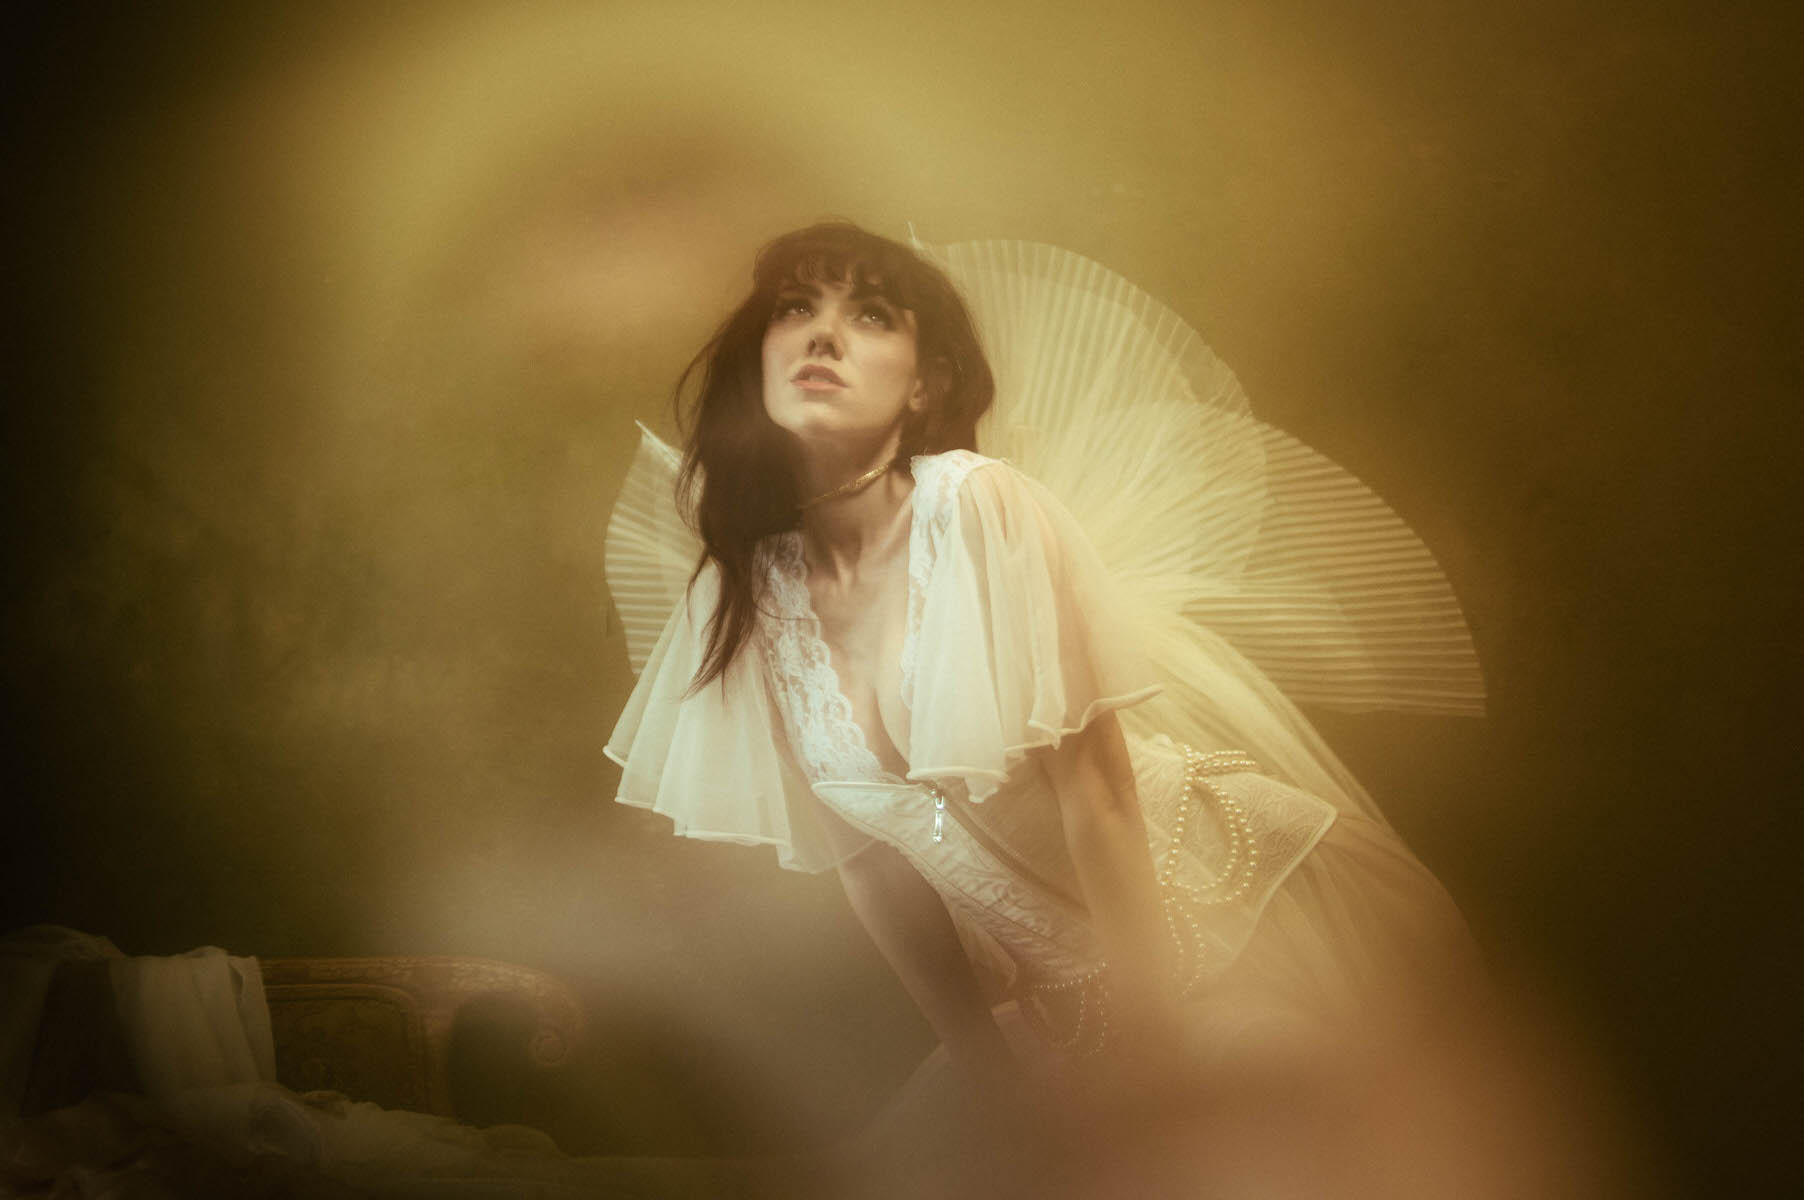 A woman in vintage clothing posing with angel wings in a hazy, dreamlike effect during a boudoir session.